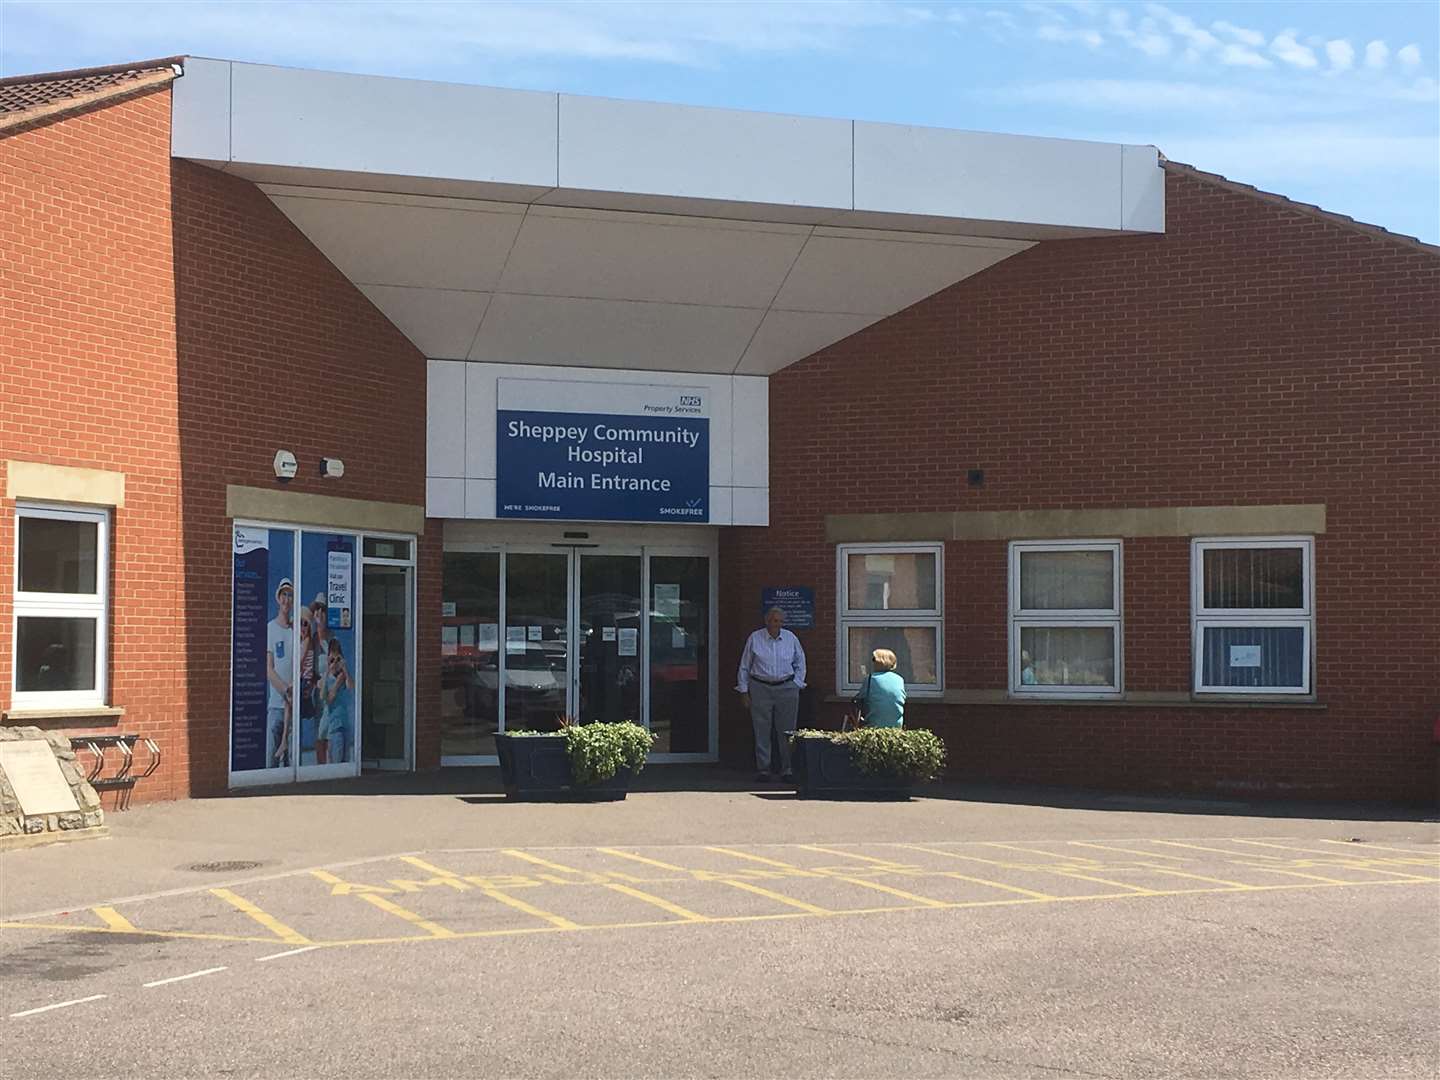 Sheppey Community Hospital, one of the hospitals where DMC operated